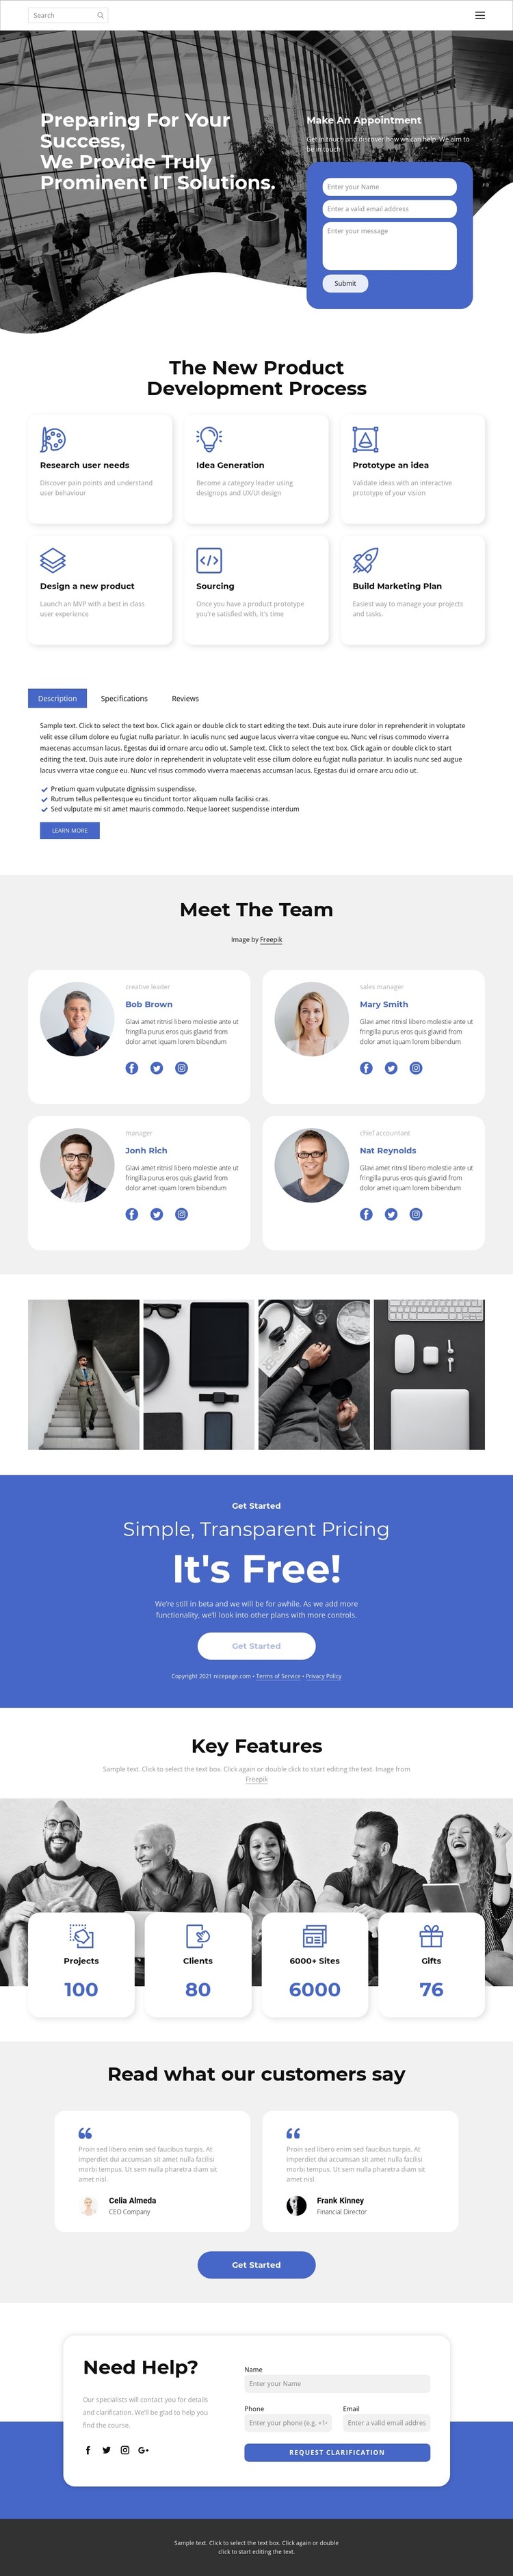 Quick help in problems HTML Template